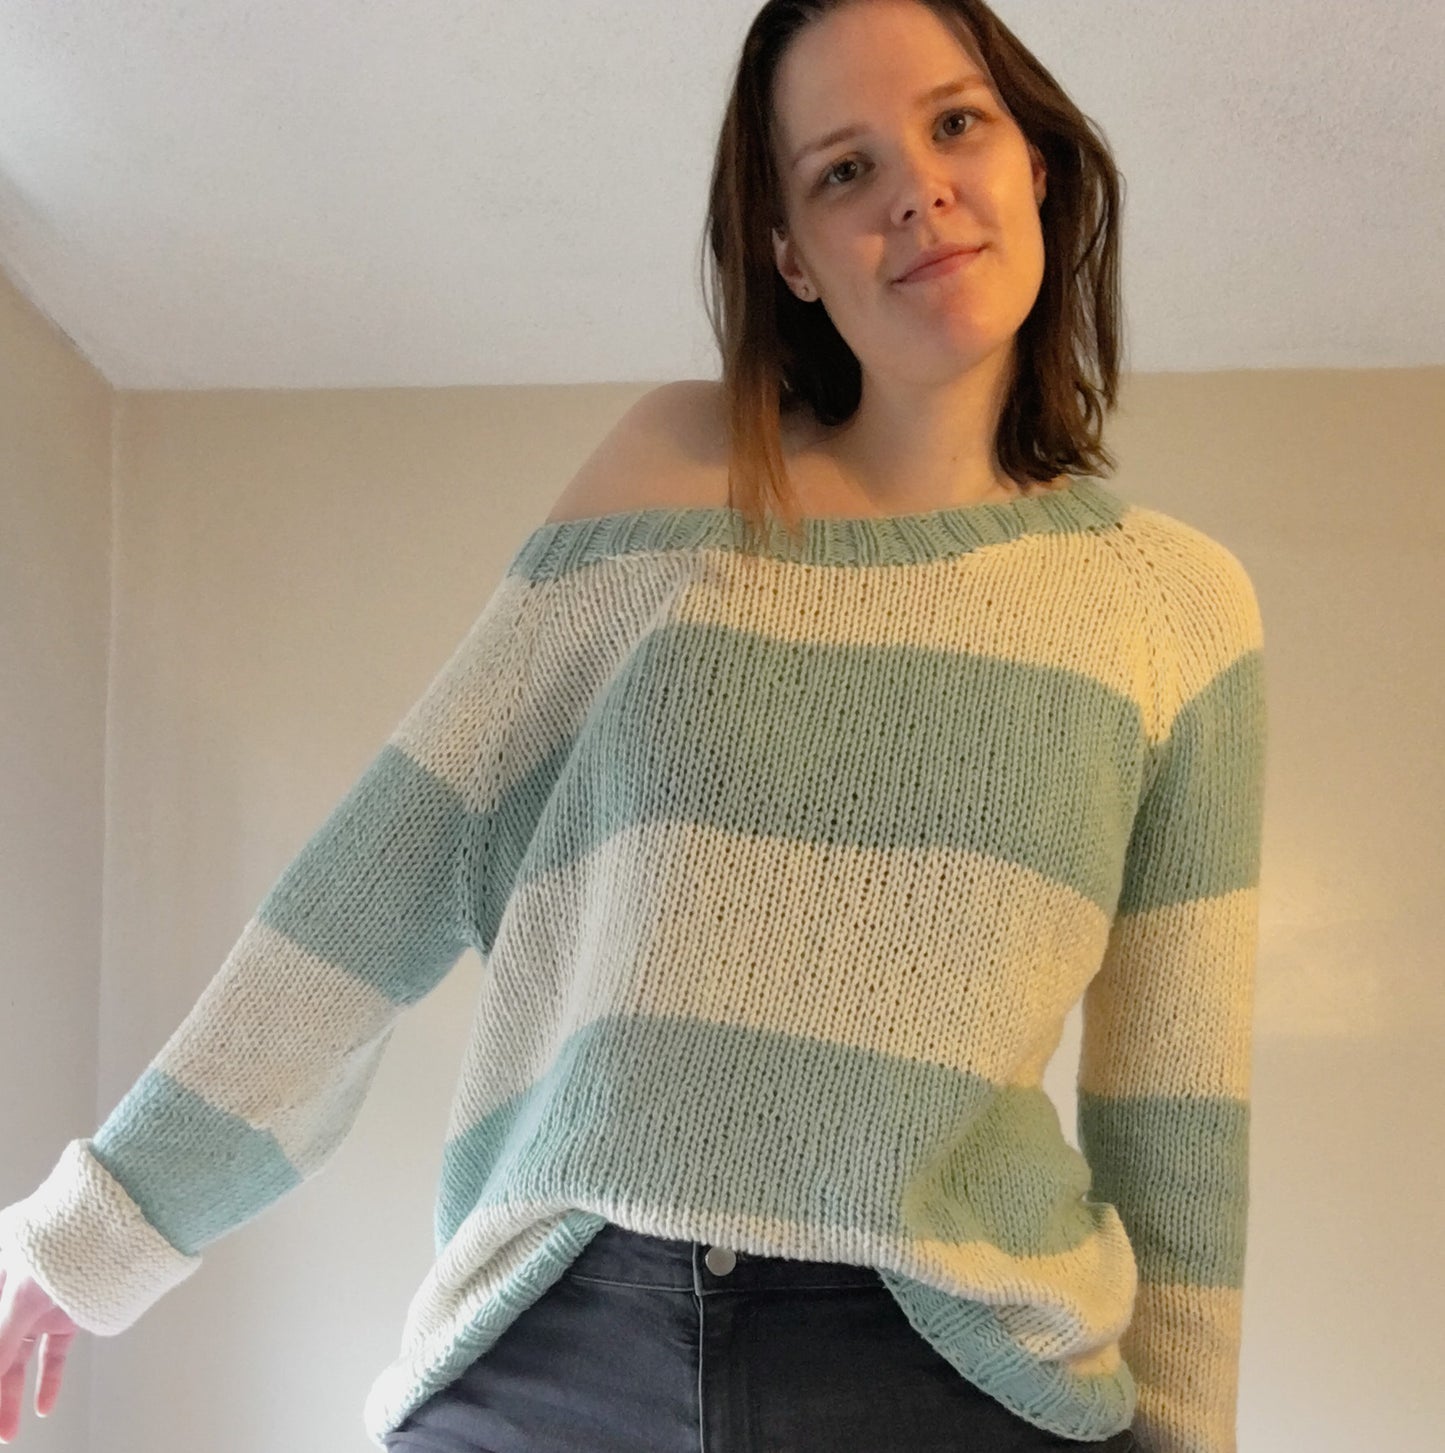 Clam Bake Pullover Knitting Pattern